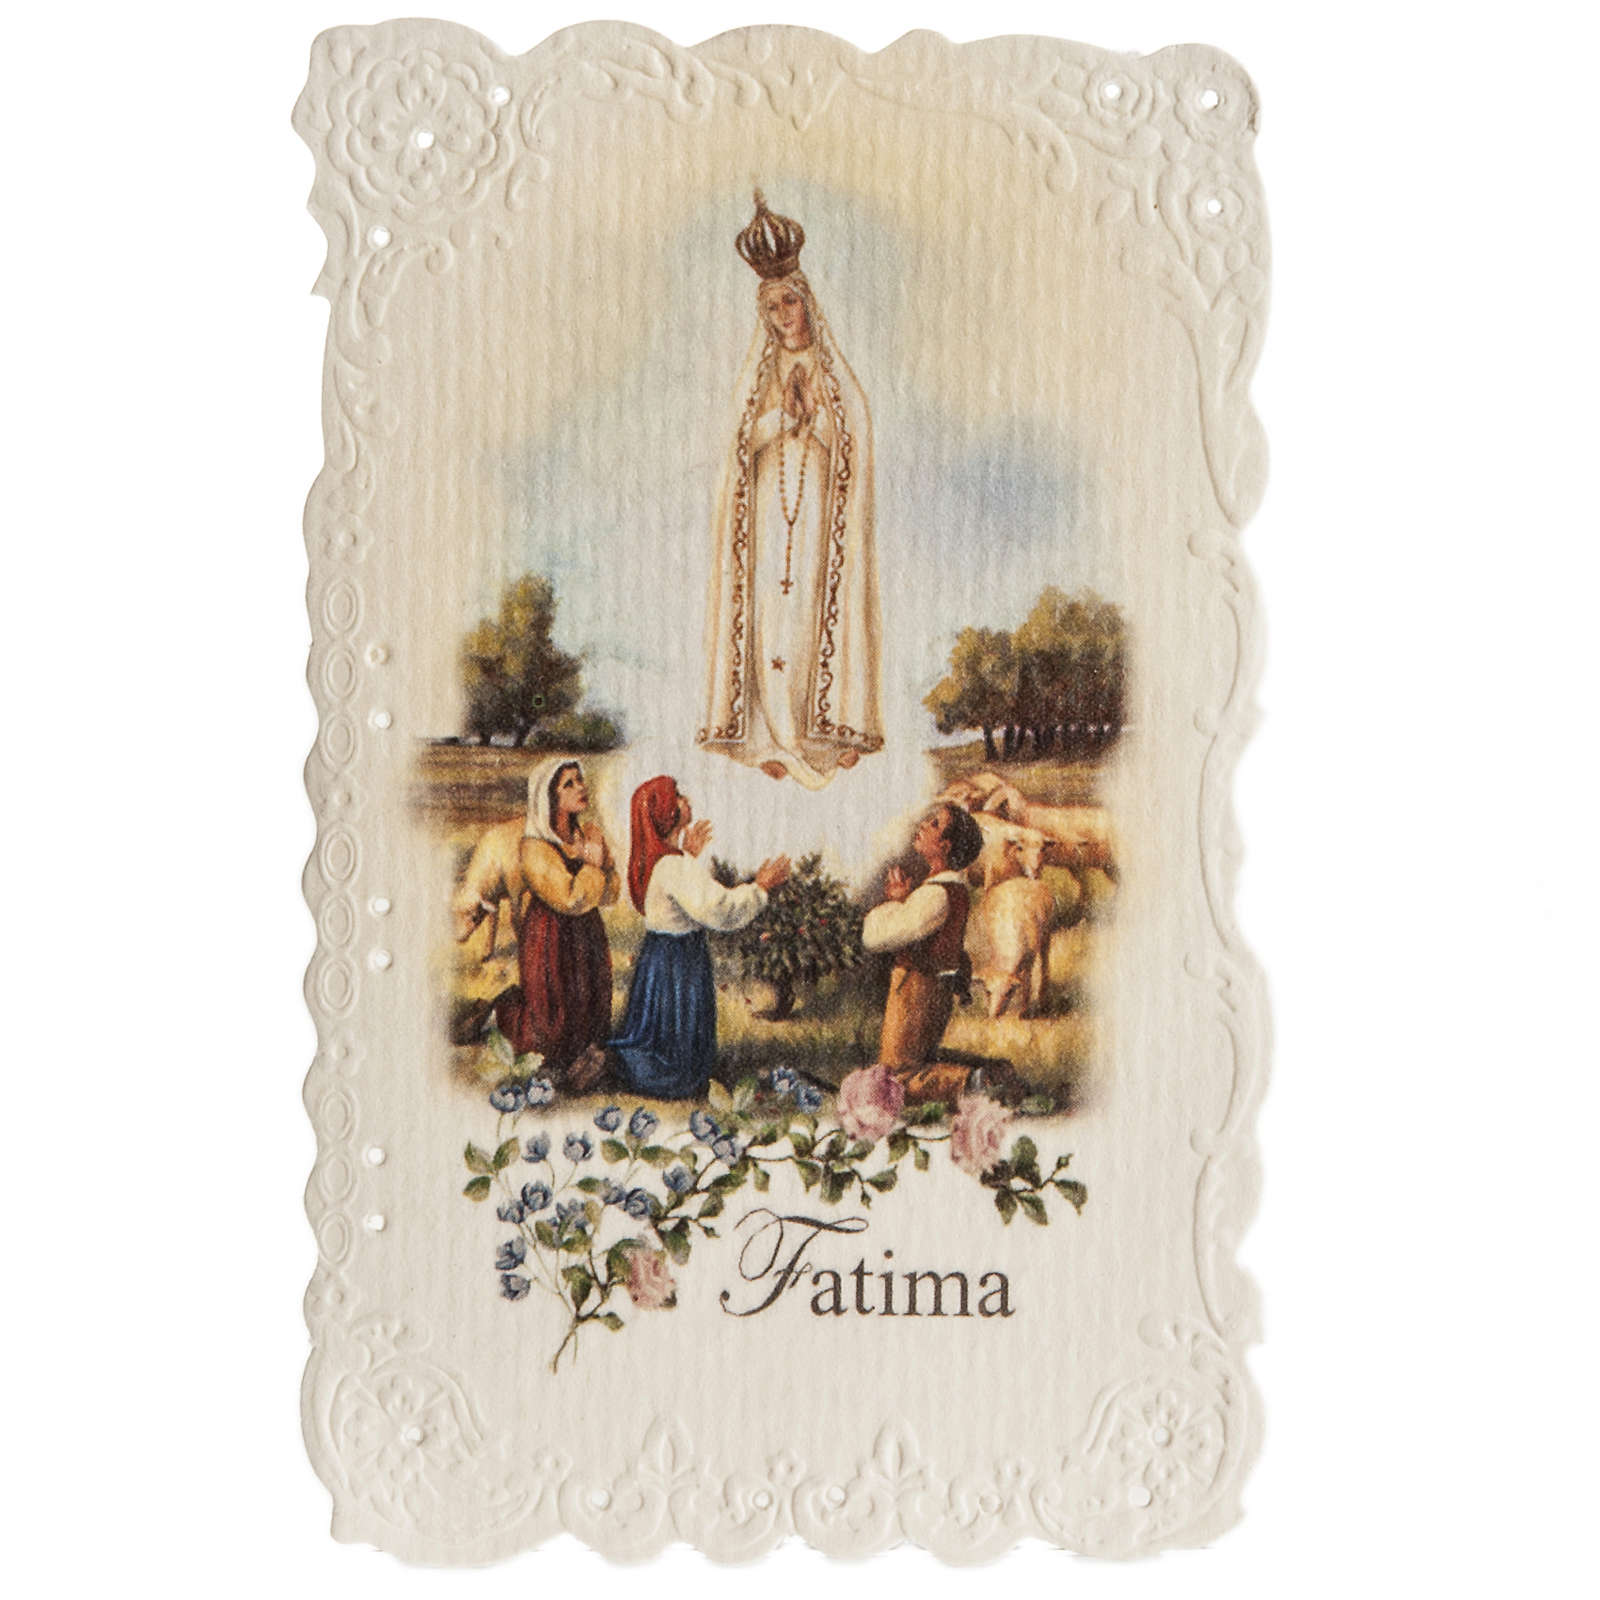 holy-card-our-lady-of-fatima-with-prayer-english-online-sales-on